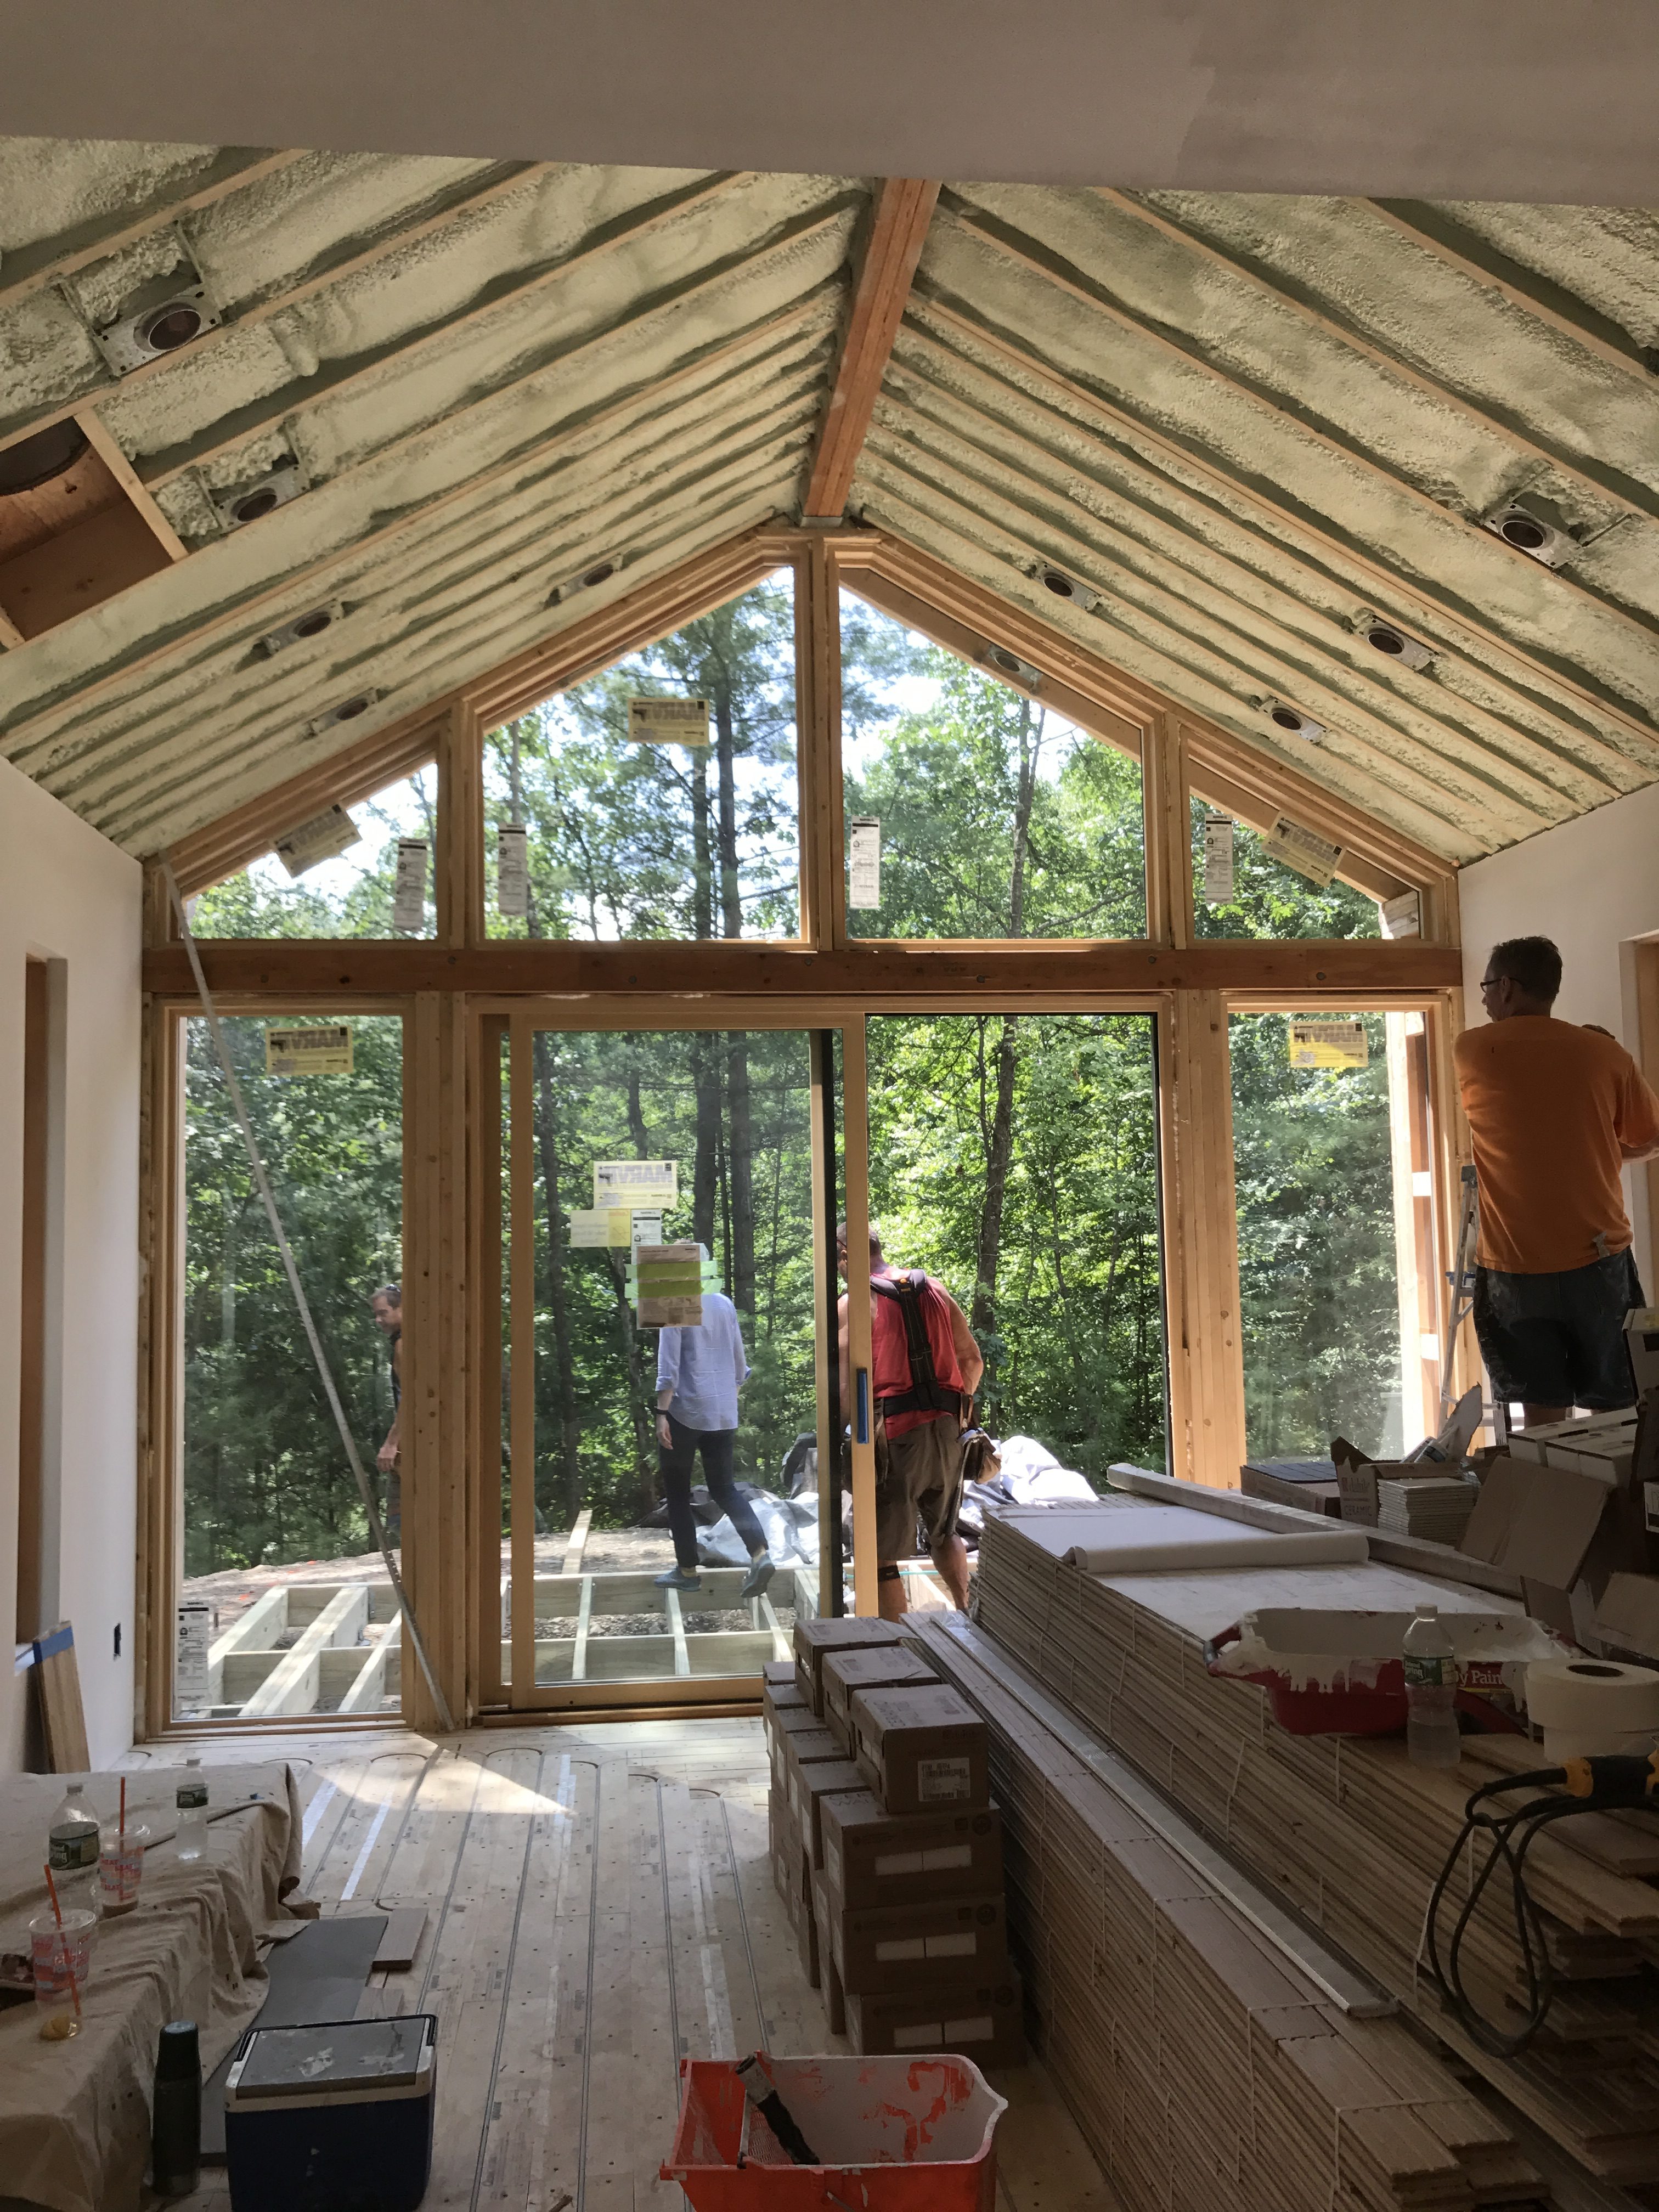 Chalet Perche - Modern Home Under Construction - Hudson Valley, NY